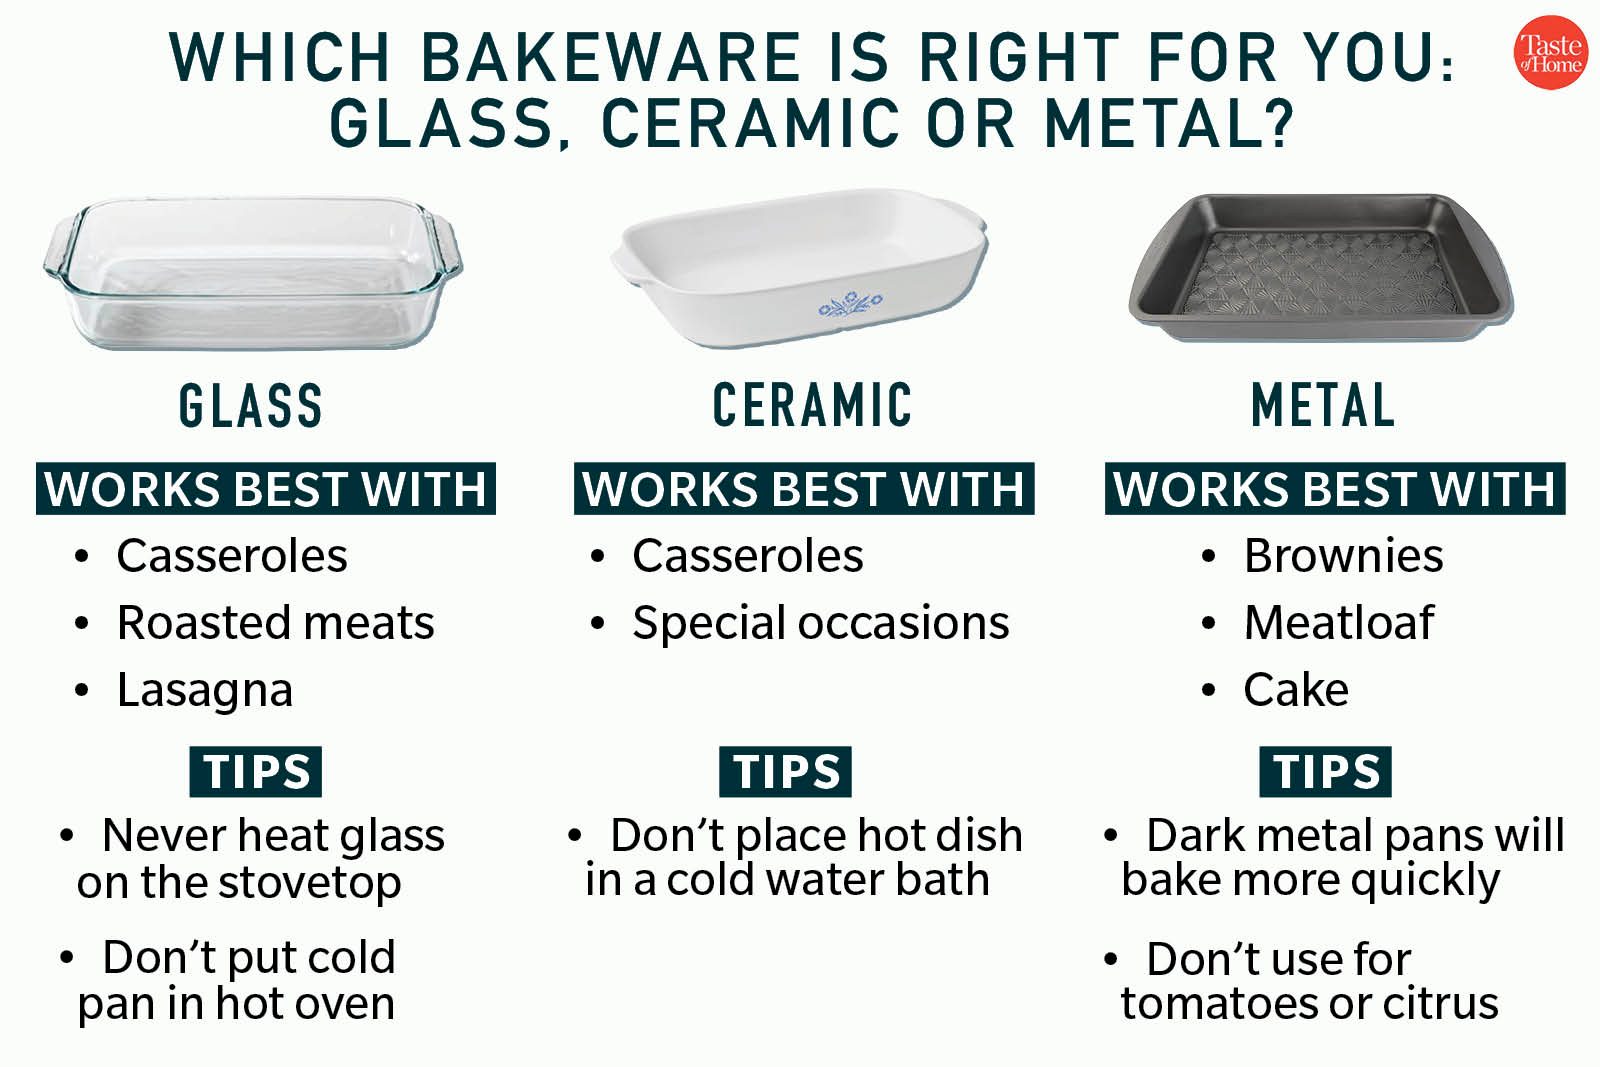 https://www.tasteofhome.com/wp-content/uploads/2020/06/Which-Bakeware-Is-Right-for-You-Metal-Glass-or-Ceramic-feature-1200x800.jpg?fit=680%2C453